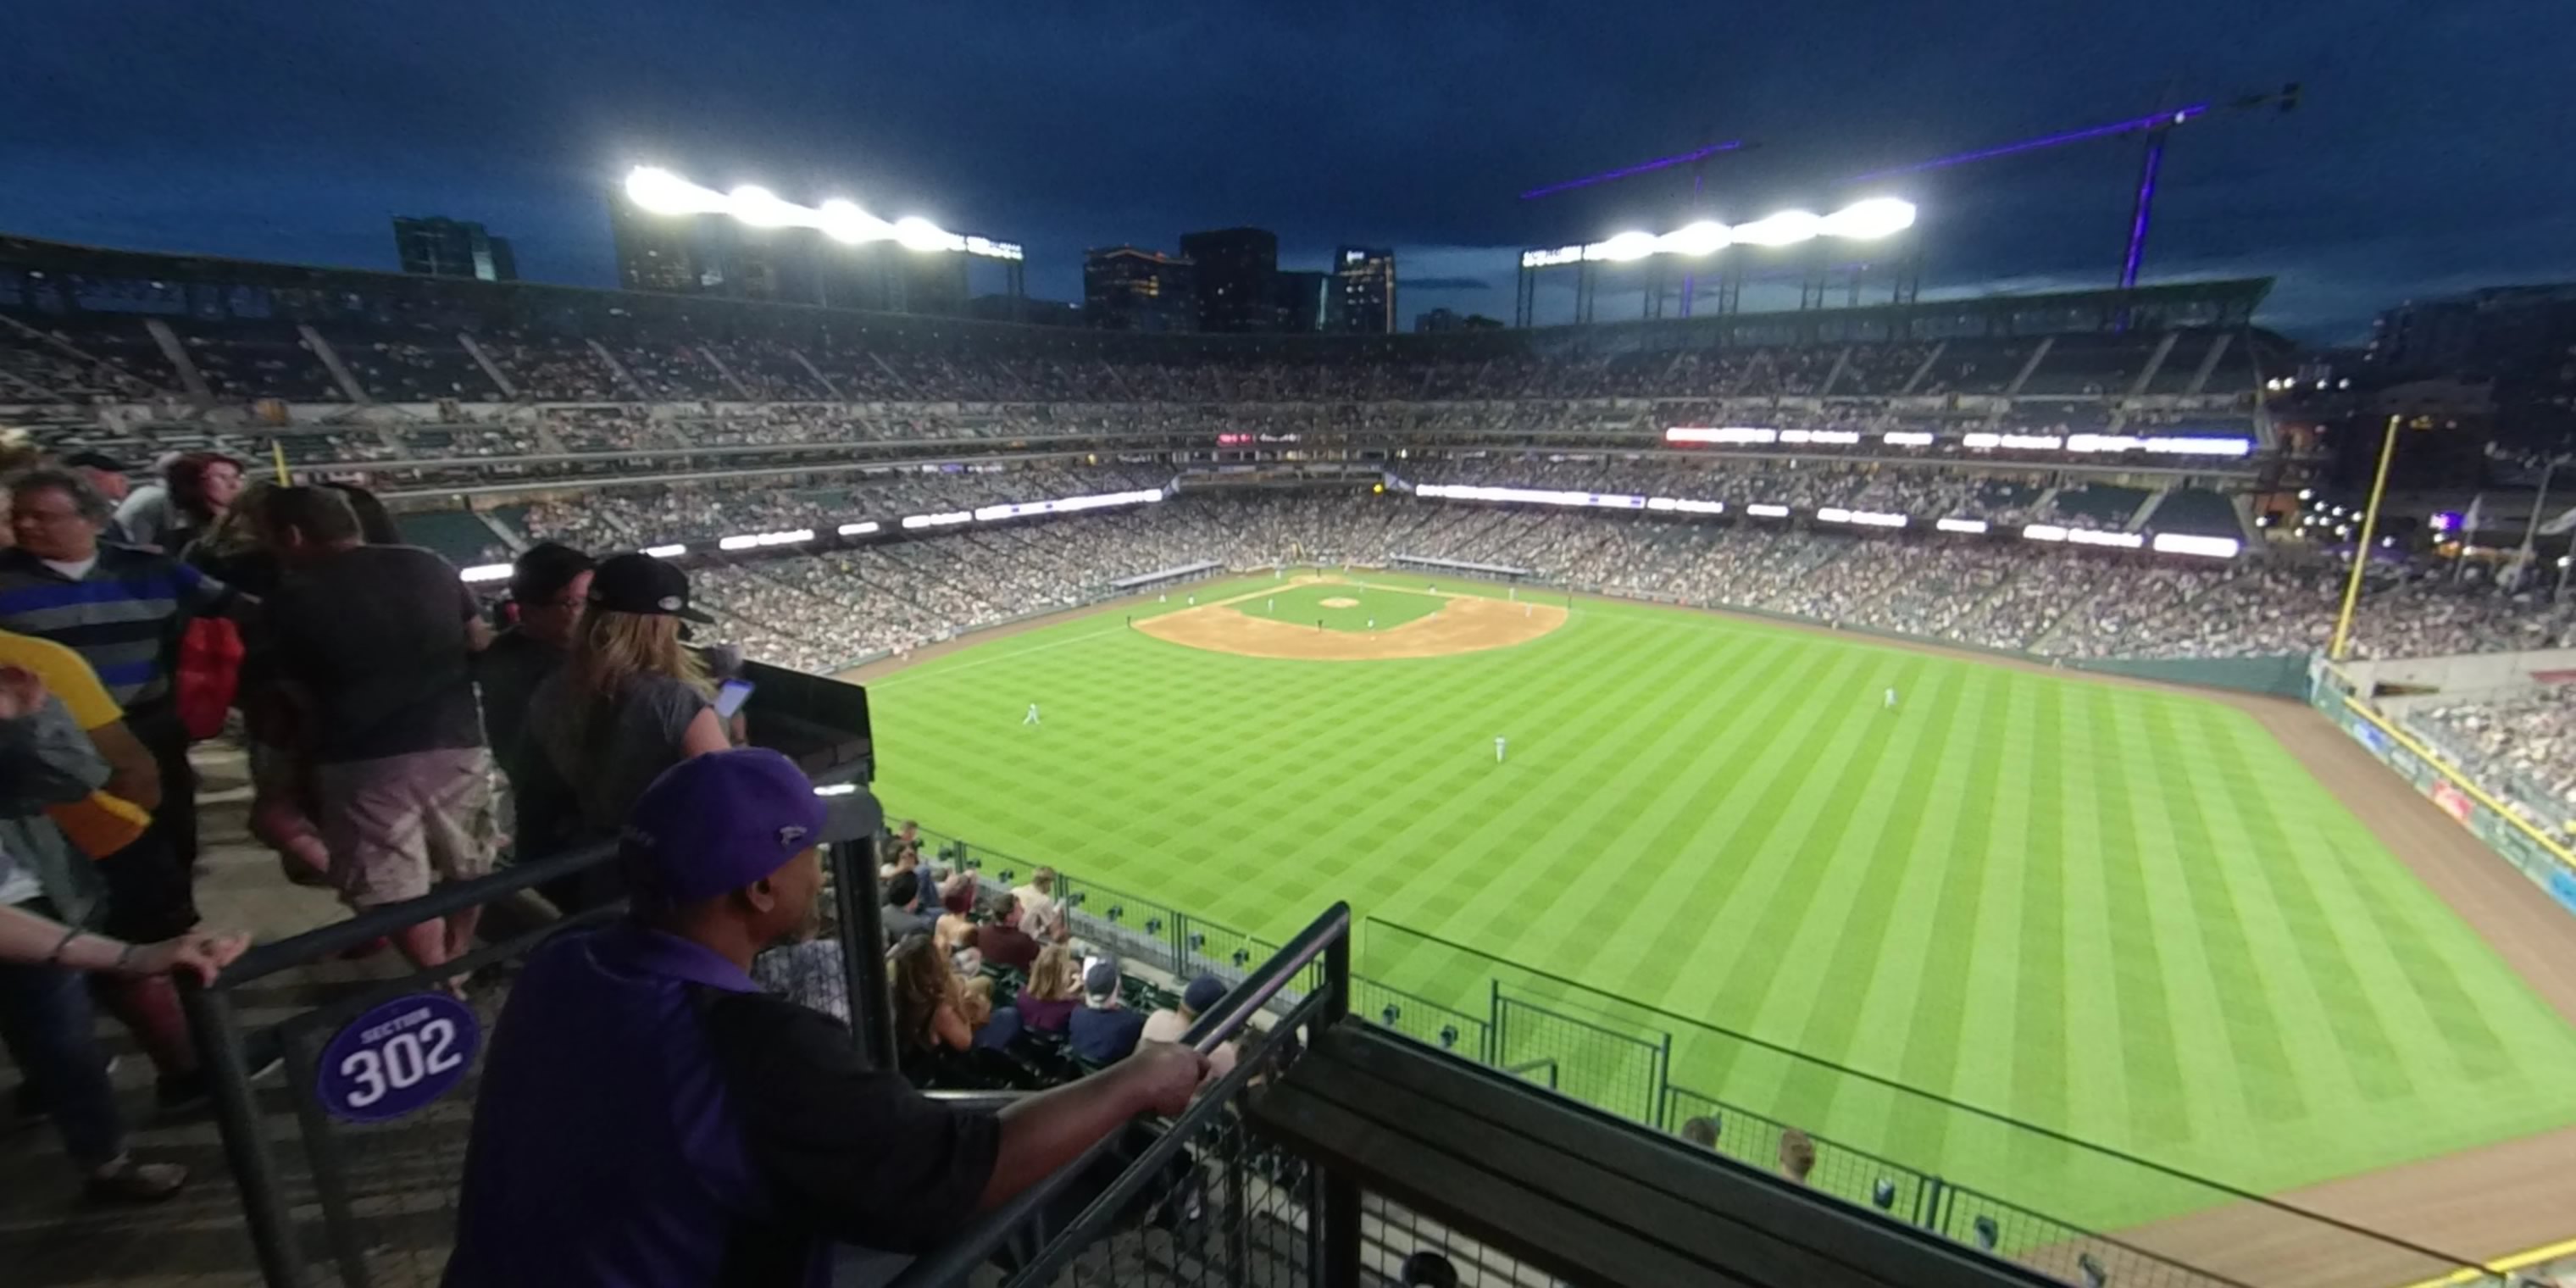 section 301 panoramic seat view  - coors field